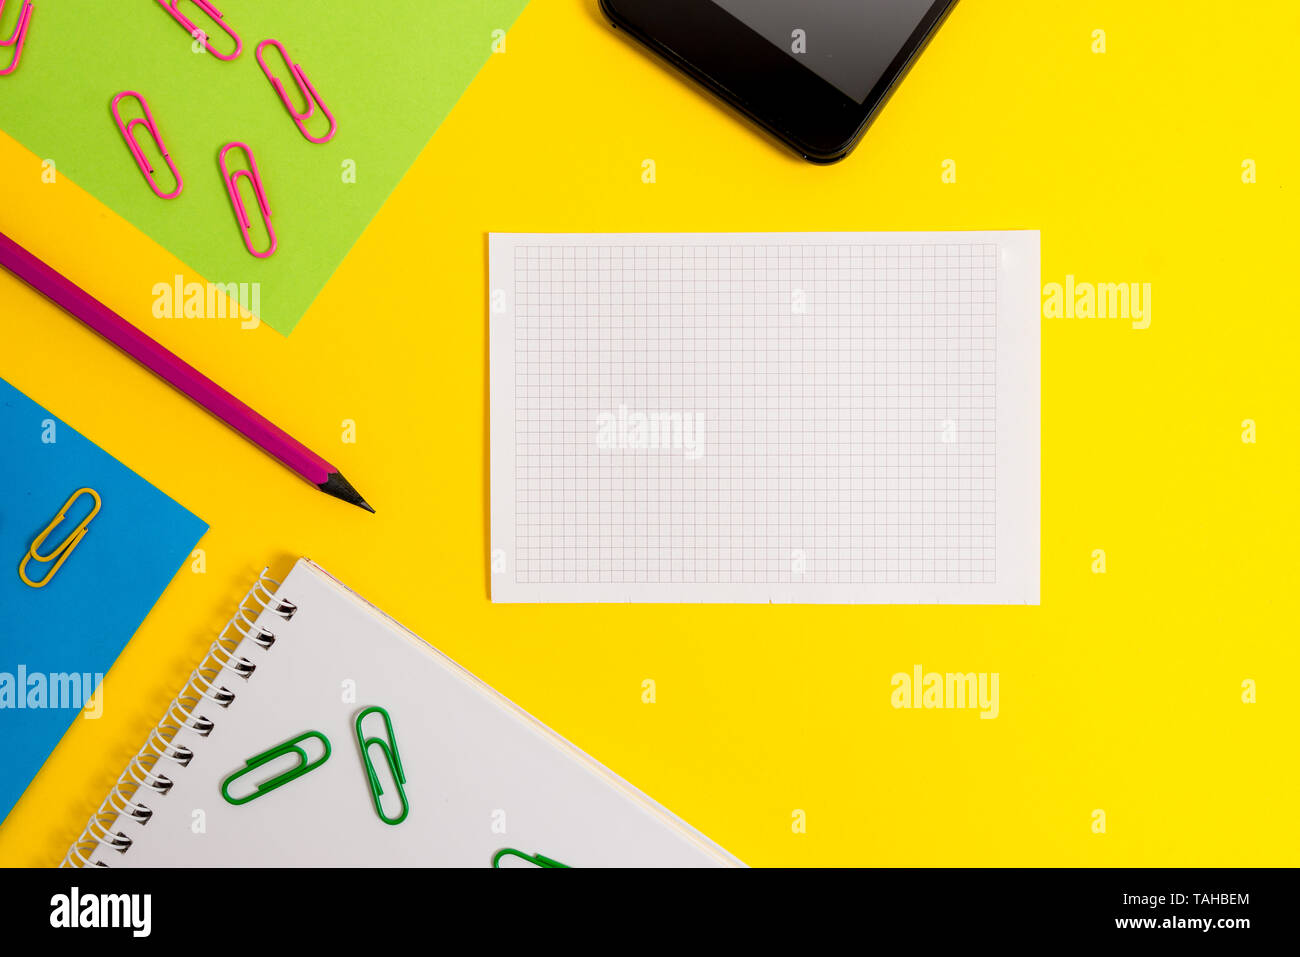 Paper sheets squared notebook pencil clips smartphone colored background Stock Photo